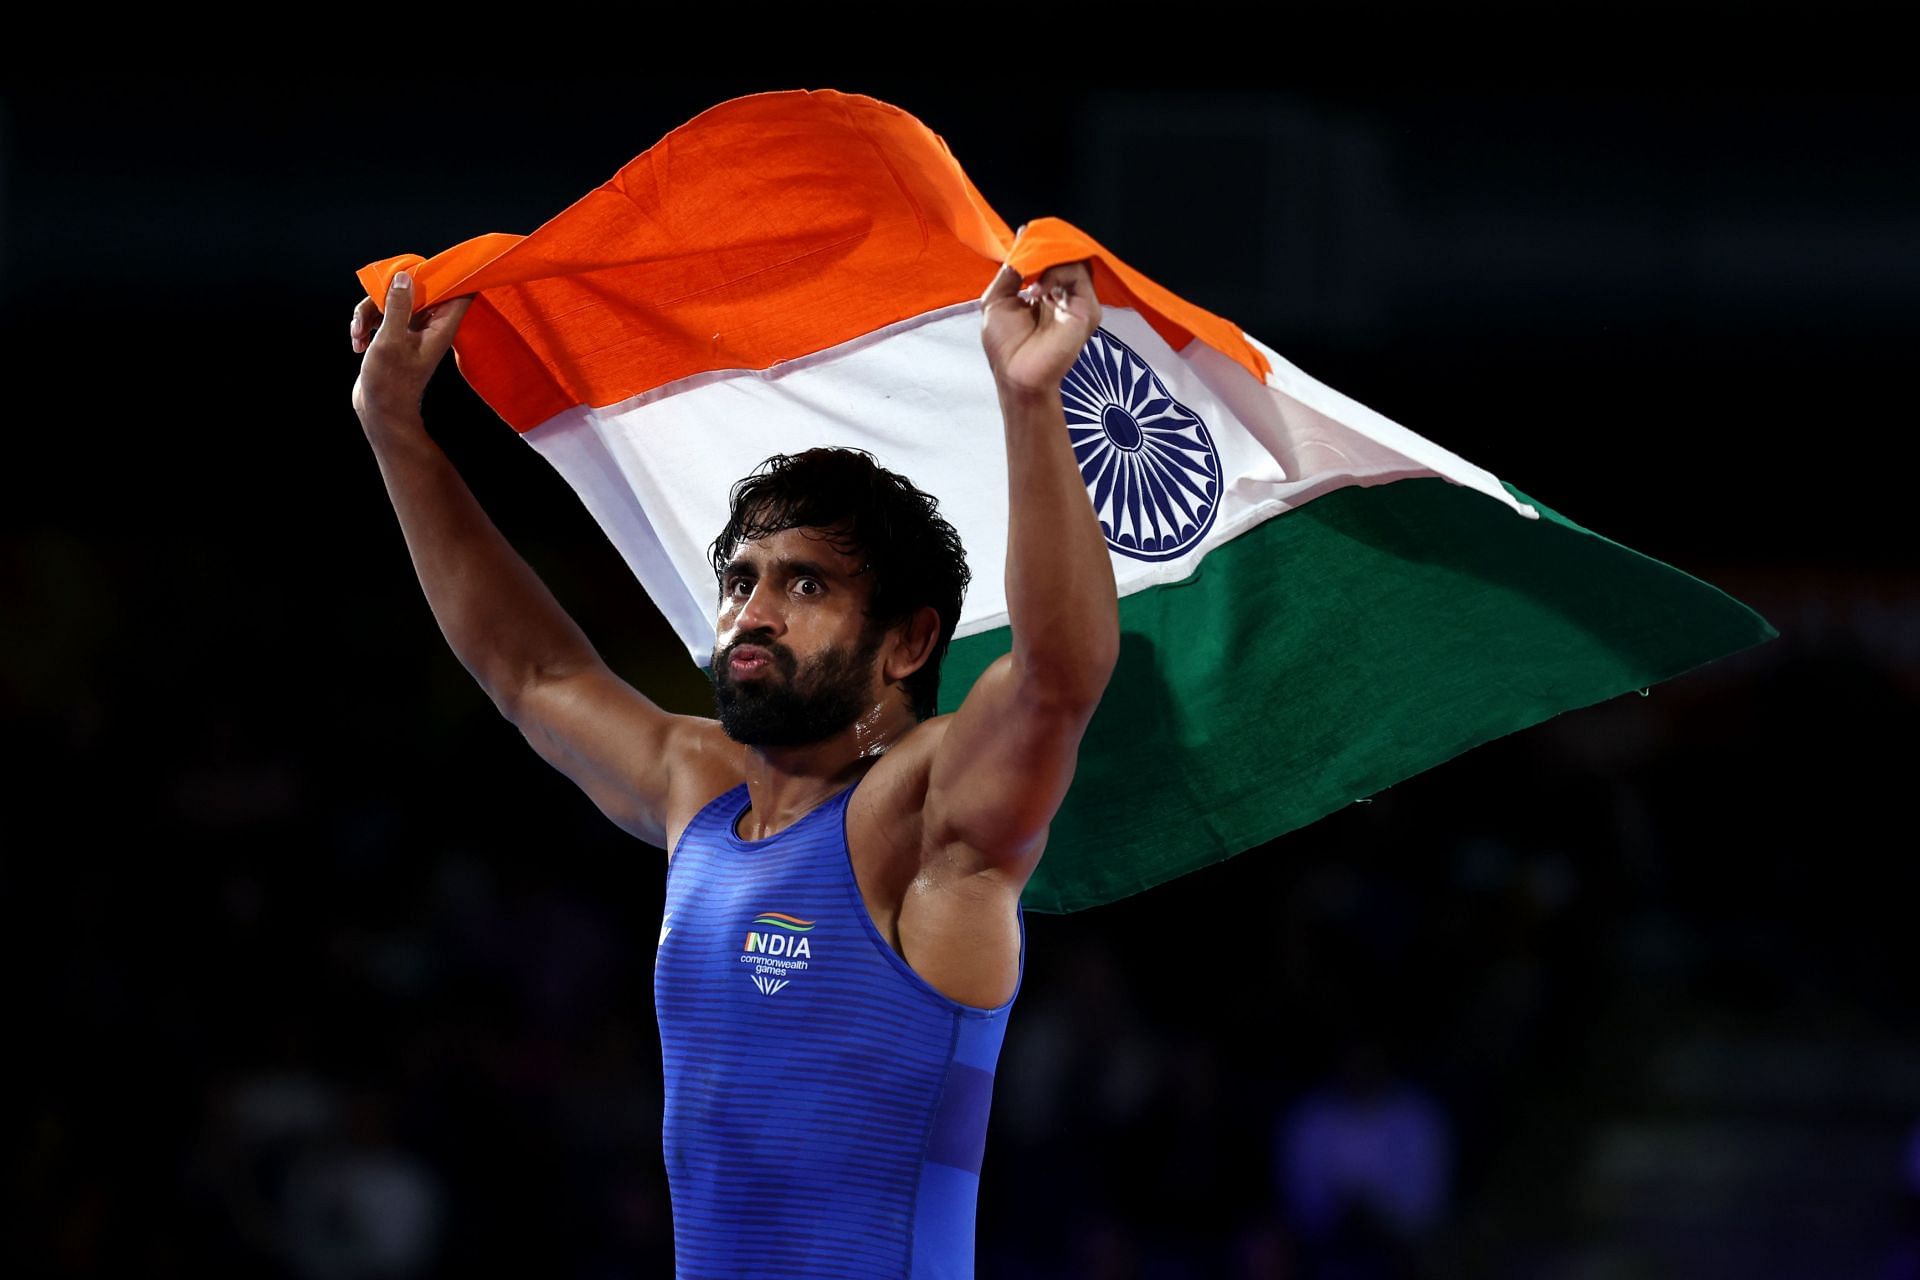 Bajrang Punia and other top wrestlers will have to participate in the National Wrestling Championships